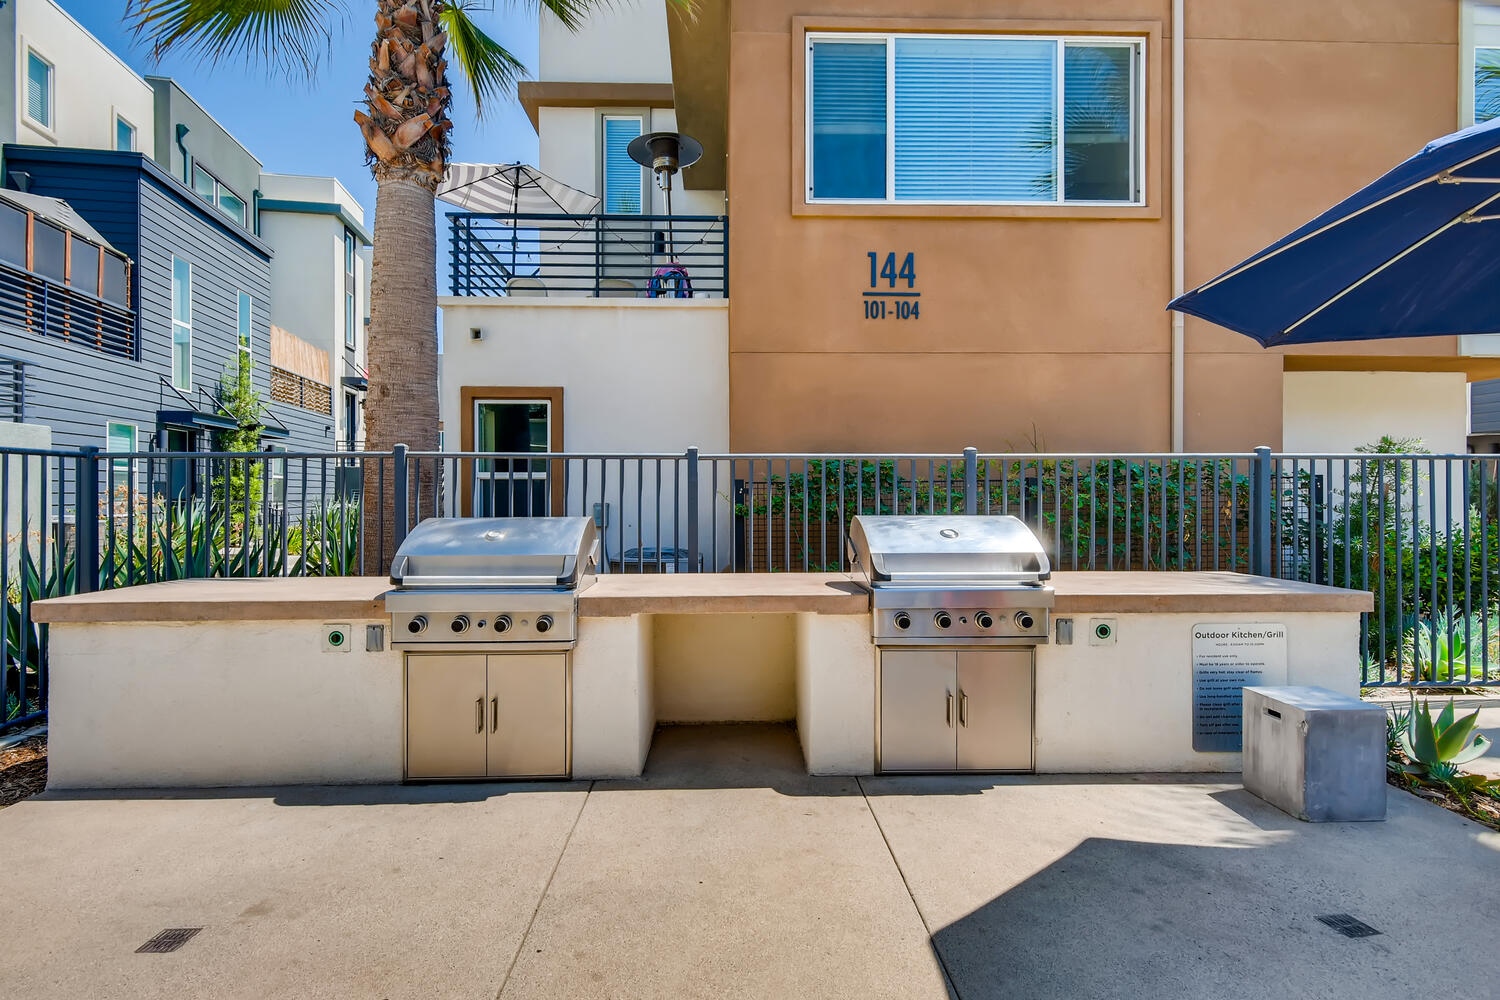 An outdoor grilling area in a residential complex with stainless steel grills, a beige countertop, and a black metal fence.